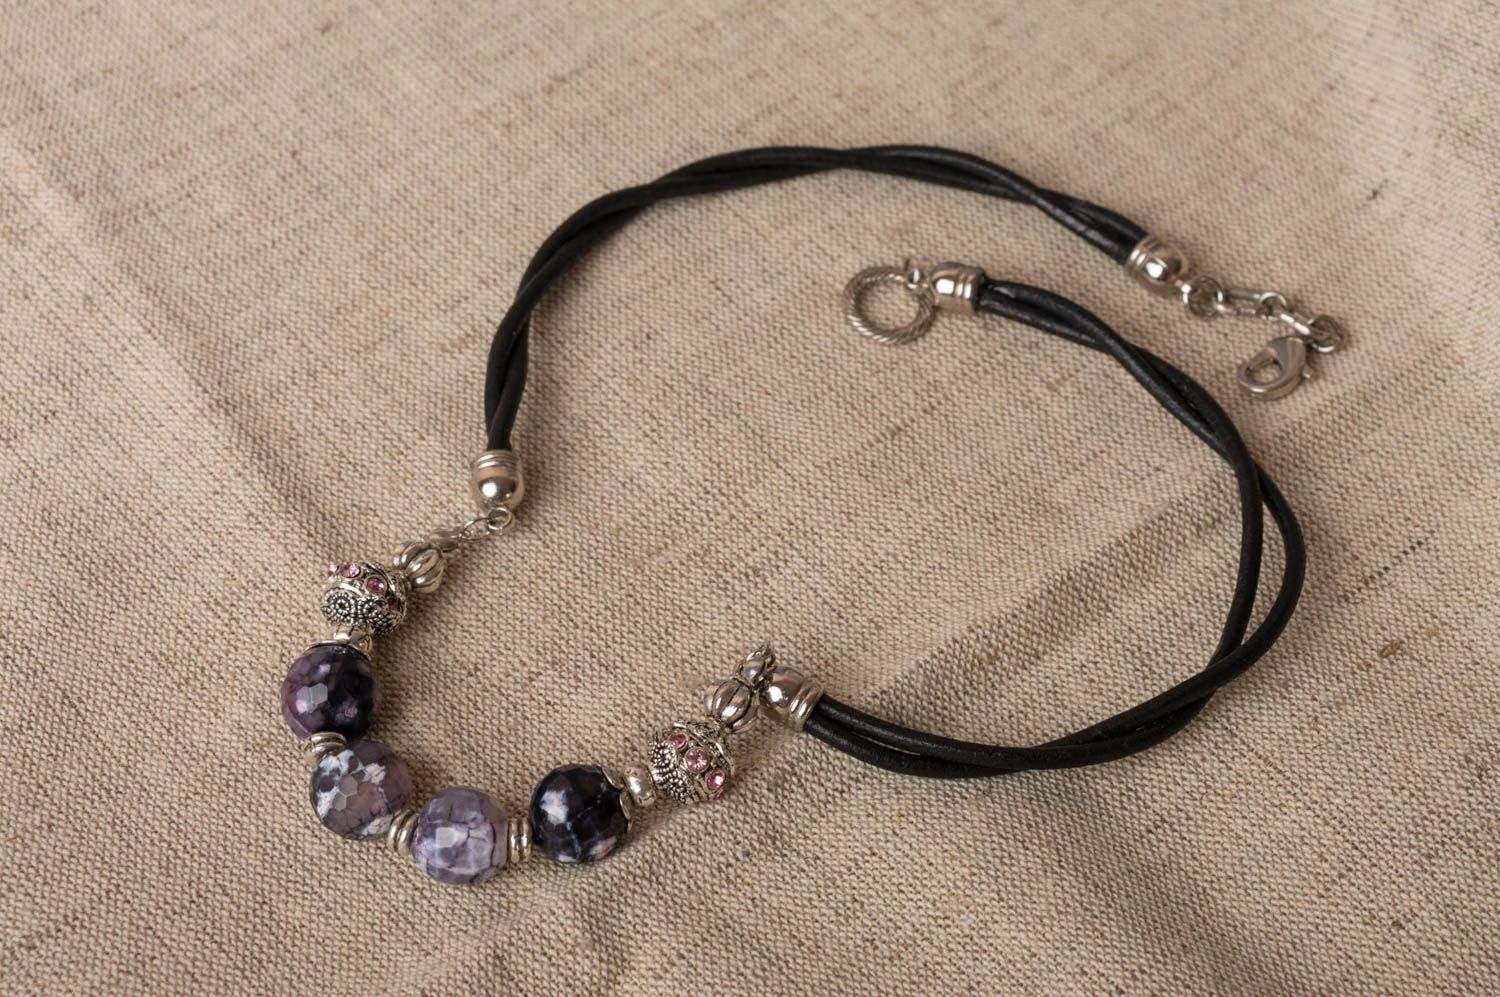 Necklace with natural stones on leather cord stylish handmade accessory photo 1